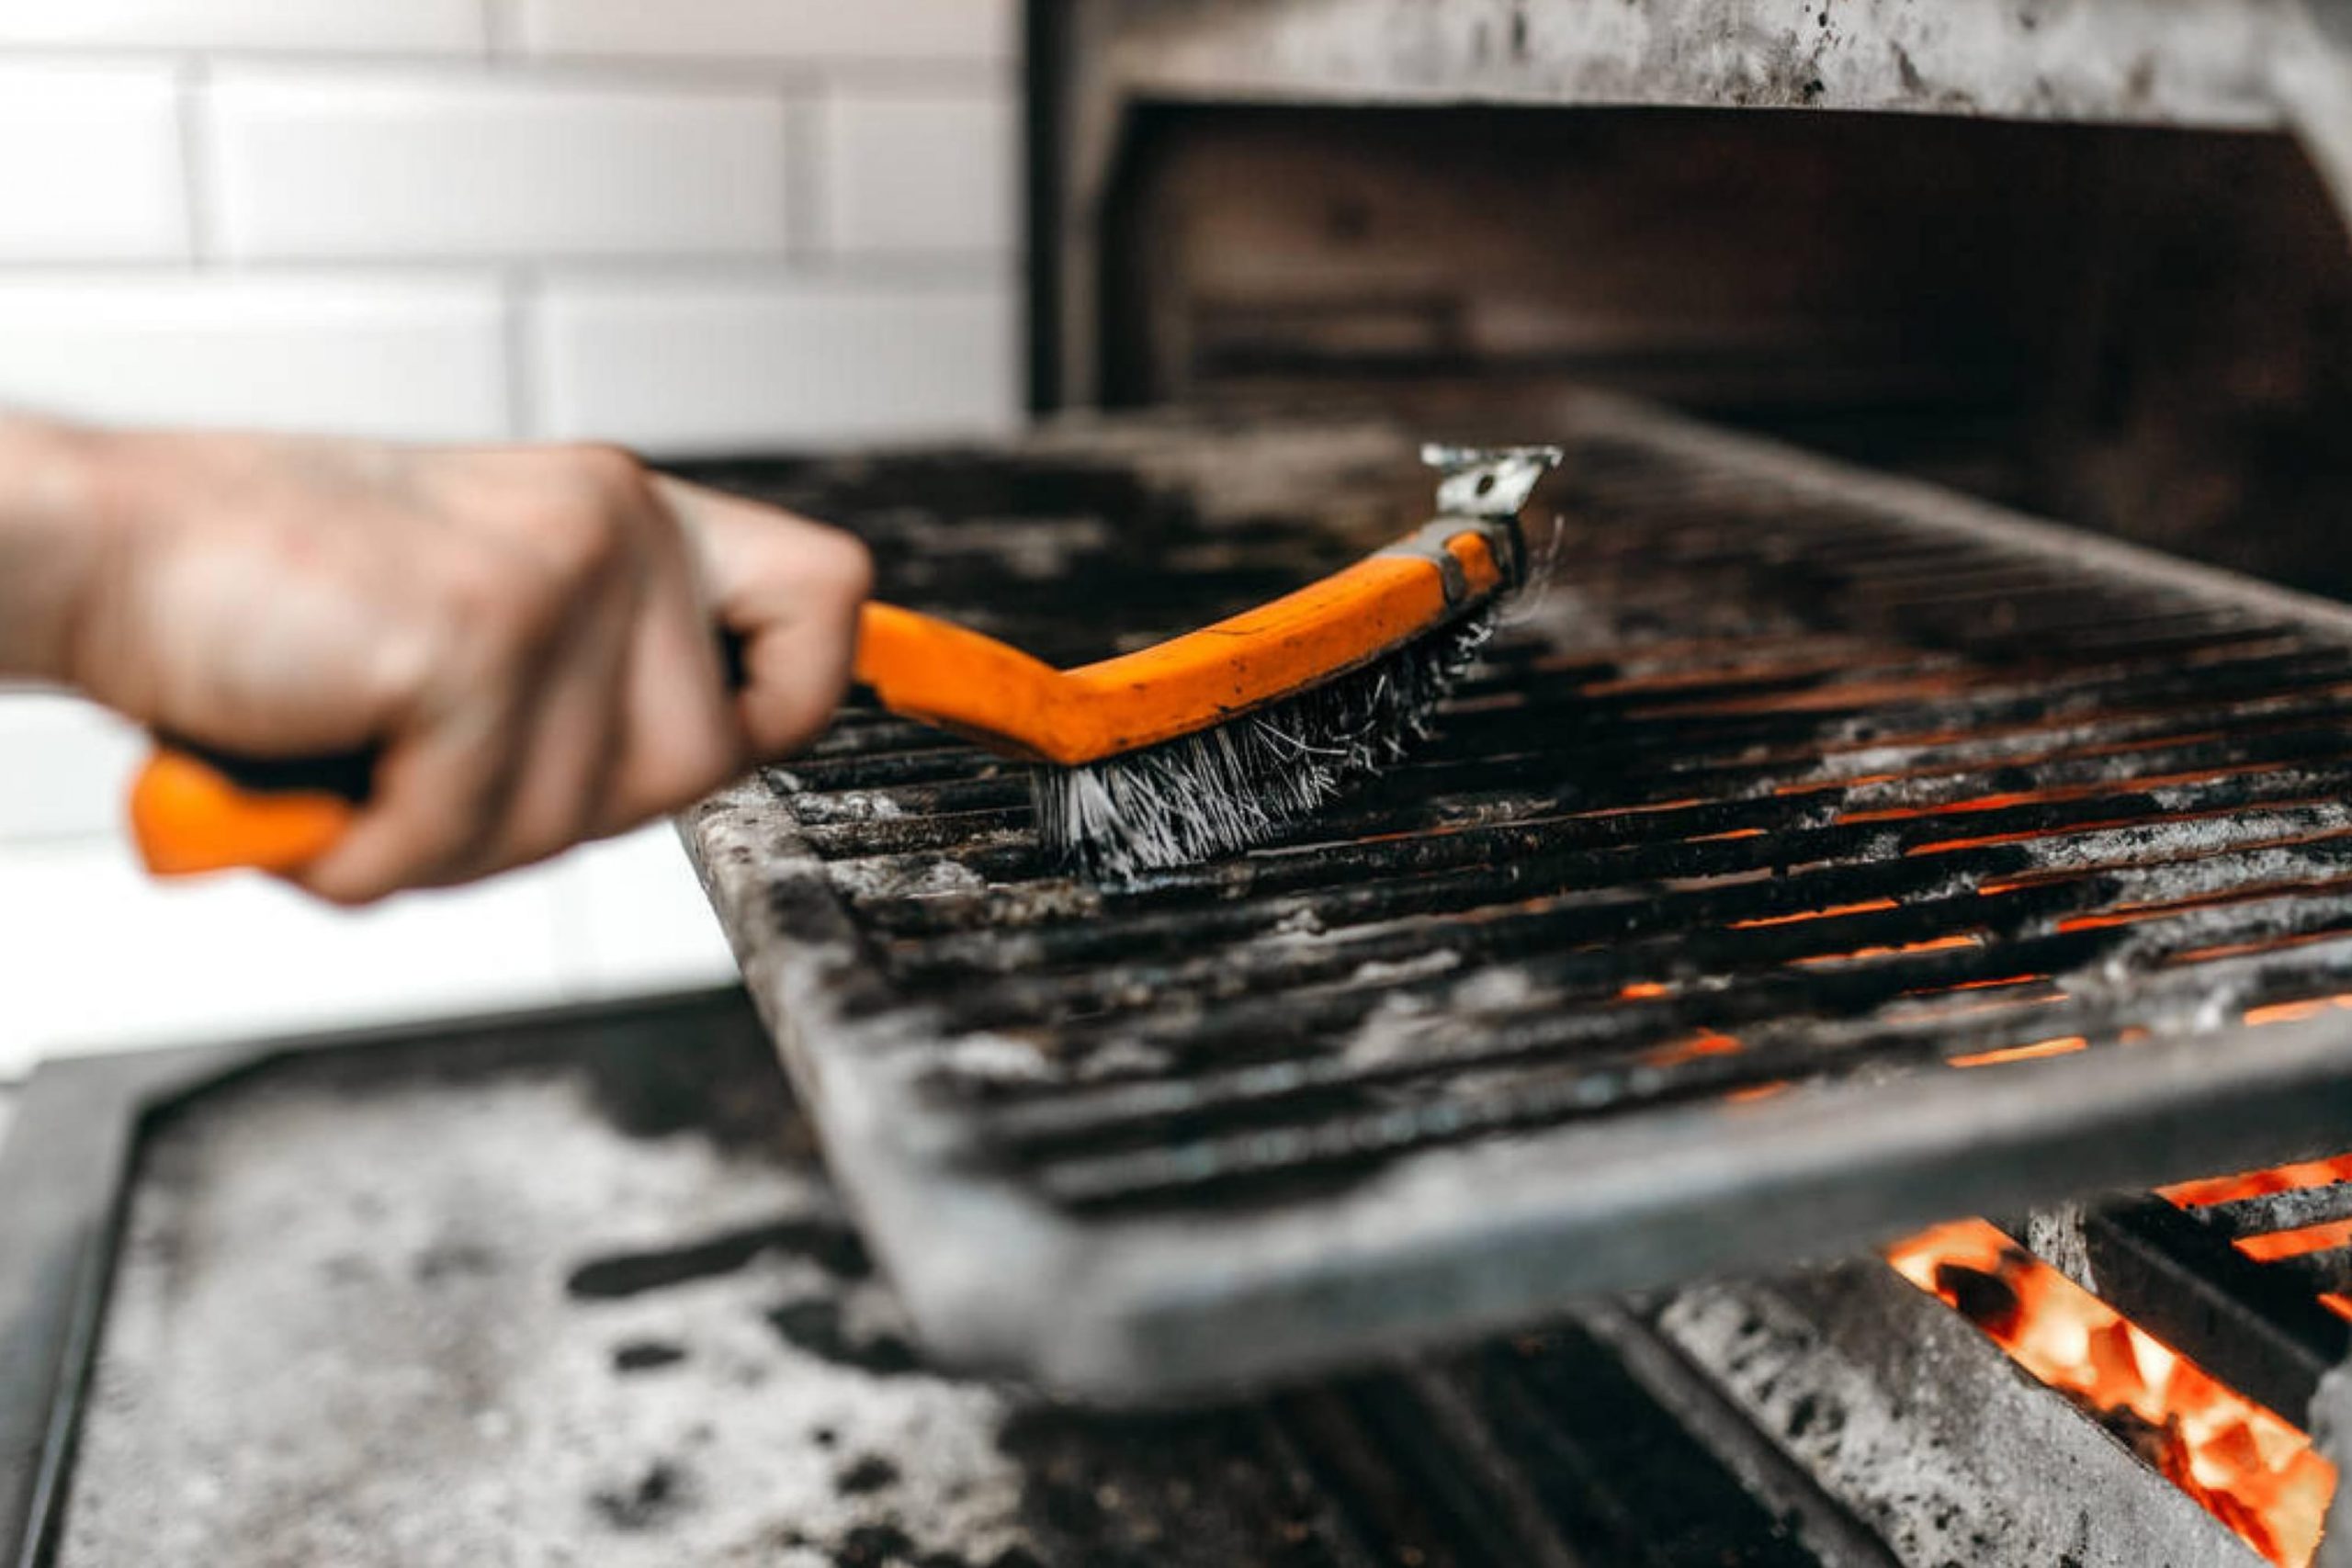 What to Do If the Bottom Of Your Grill Rusted?